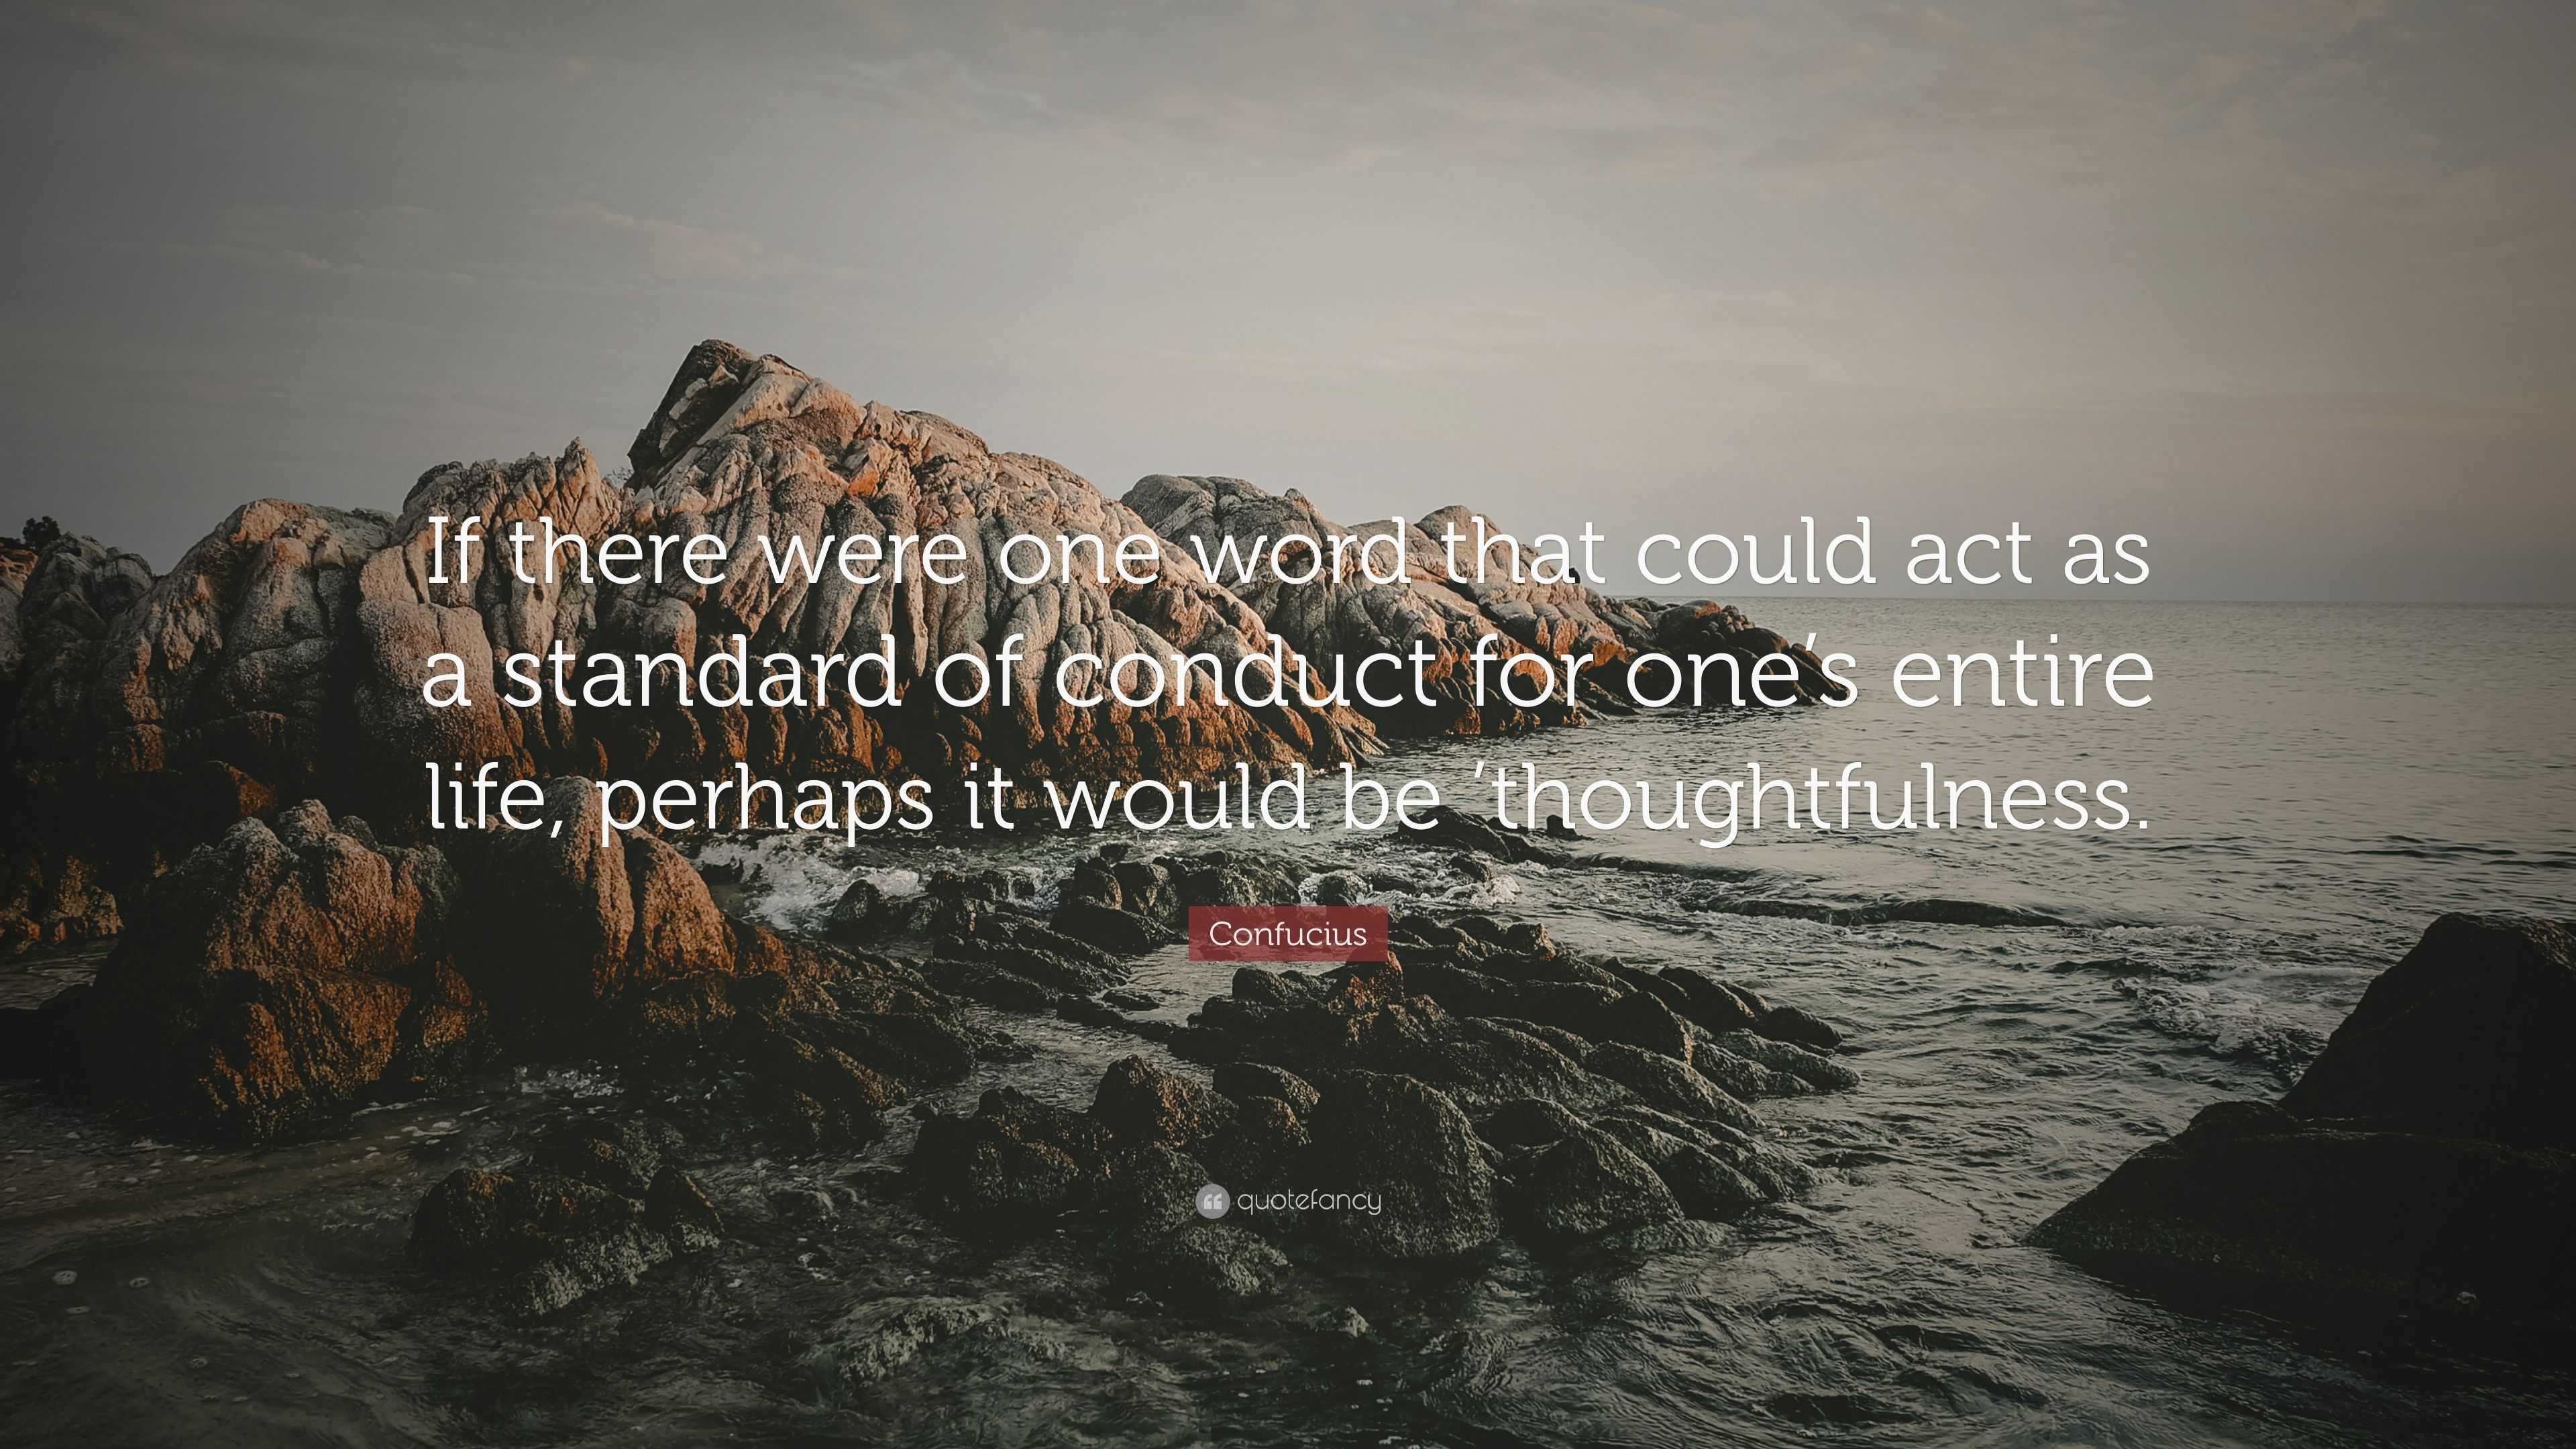 Confucius Quote: “If there were one word that could act as a standard ...